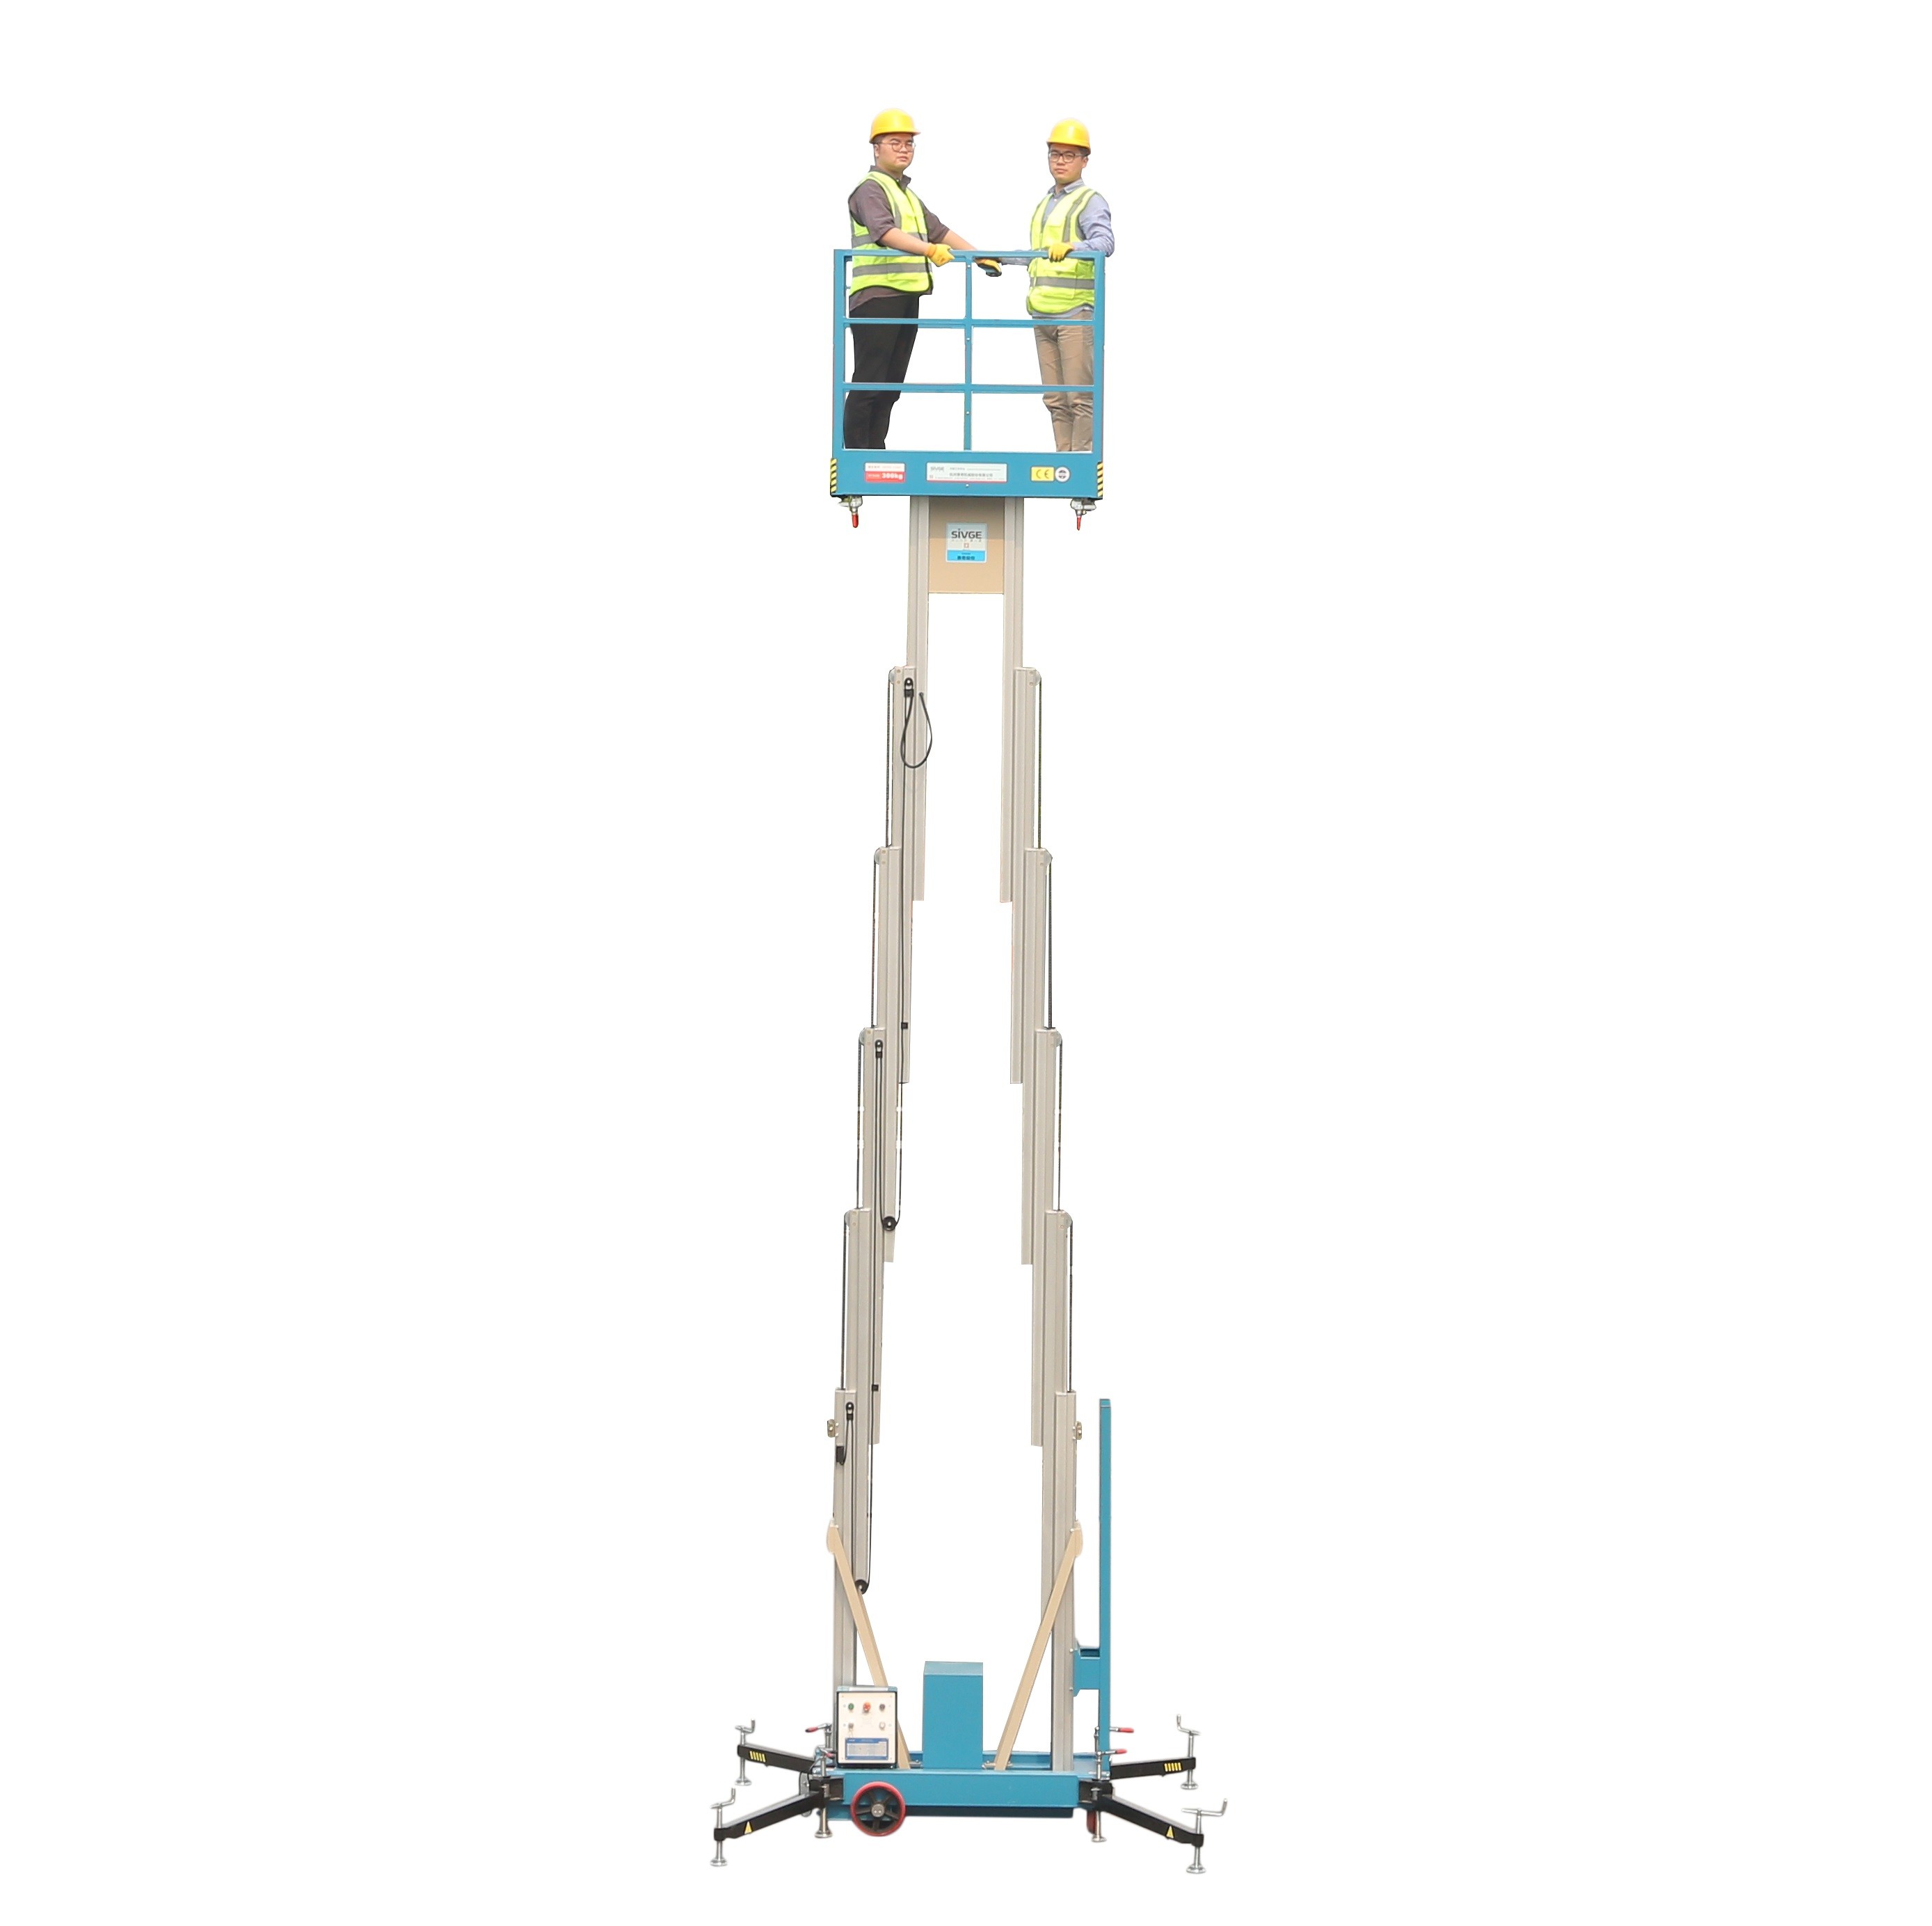  14 M Working Height Compact Double Mast Aluminum Mobile Aerial Work Platform Manufactures